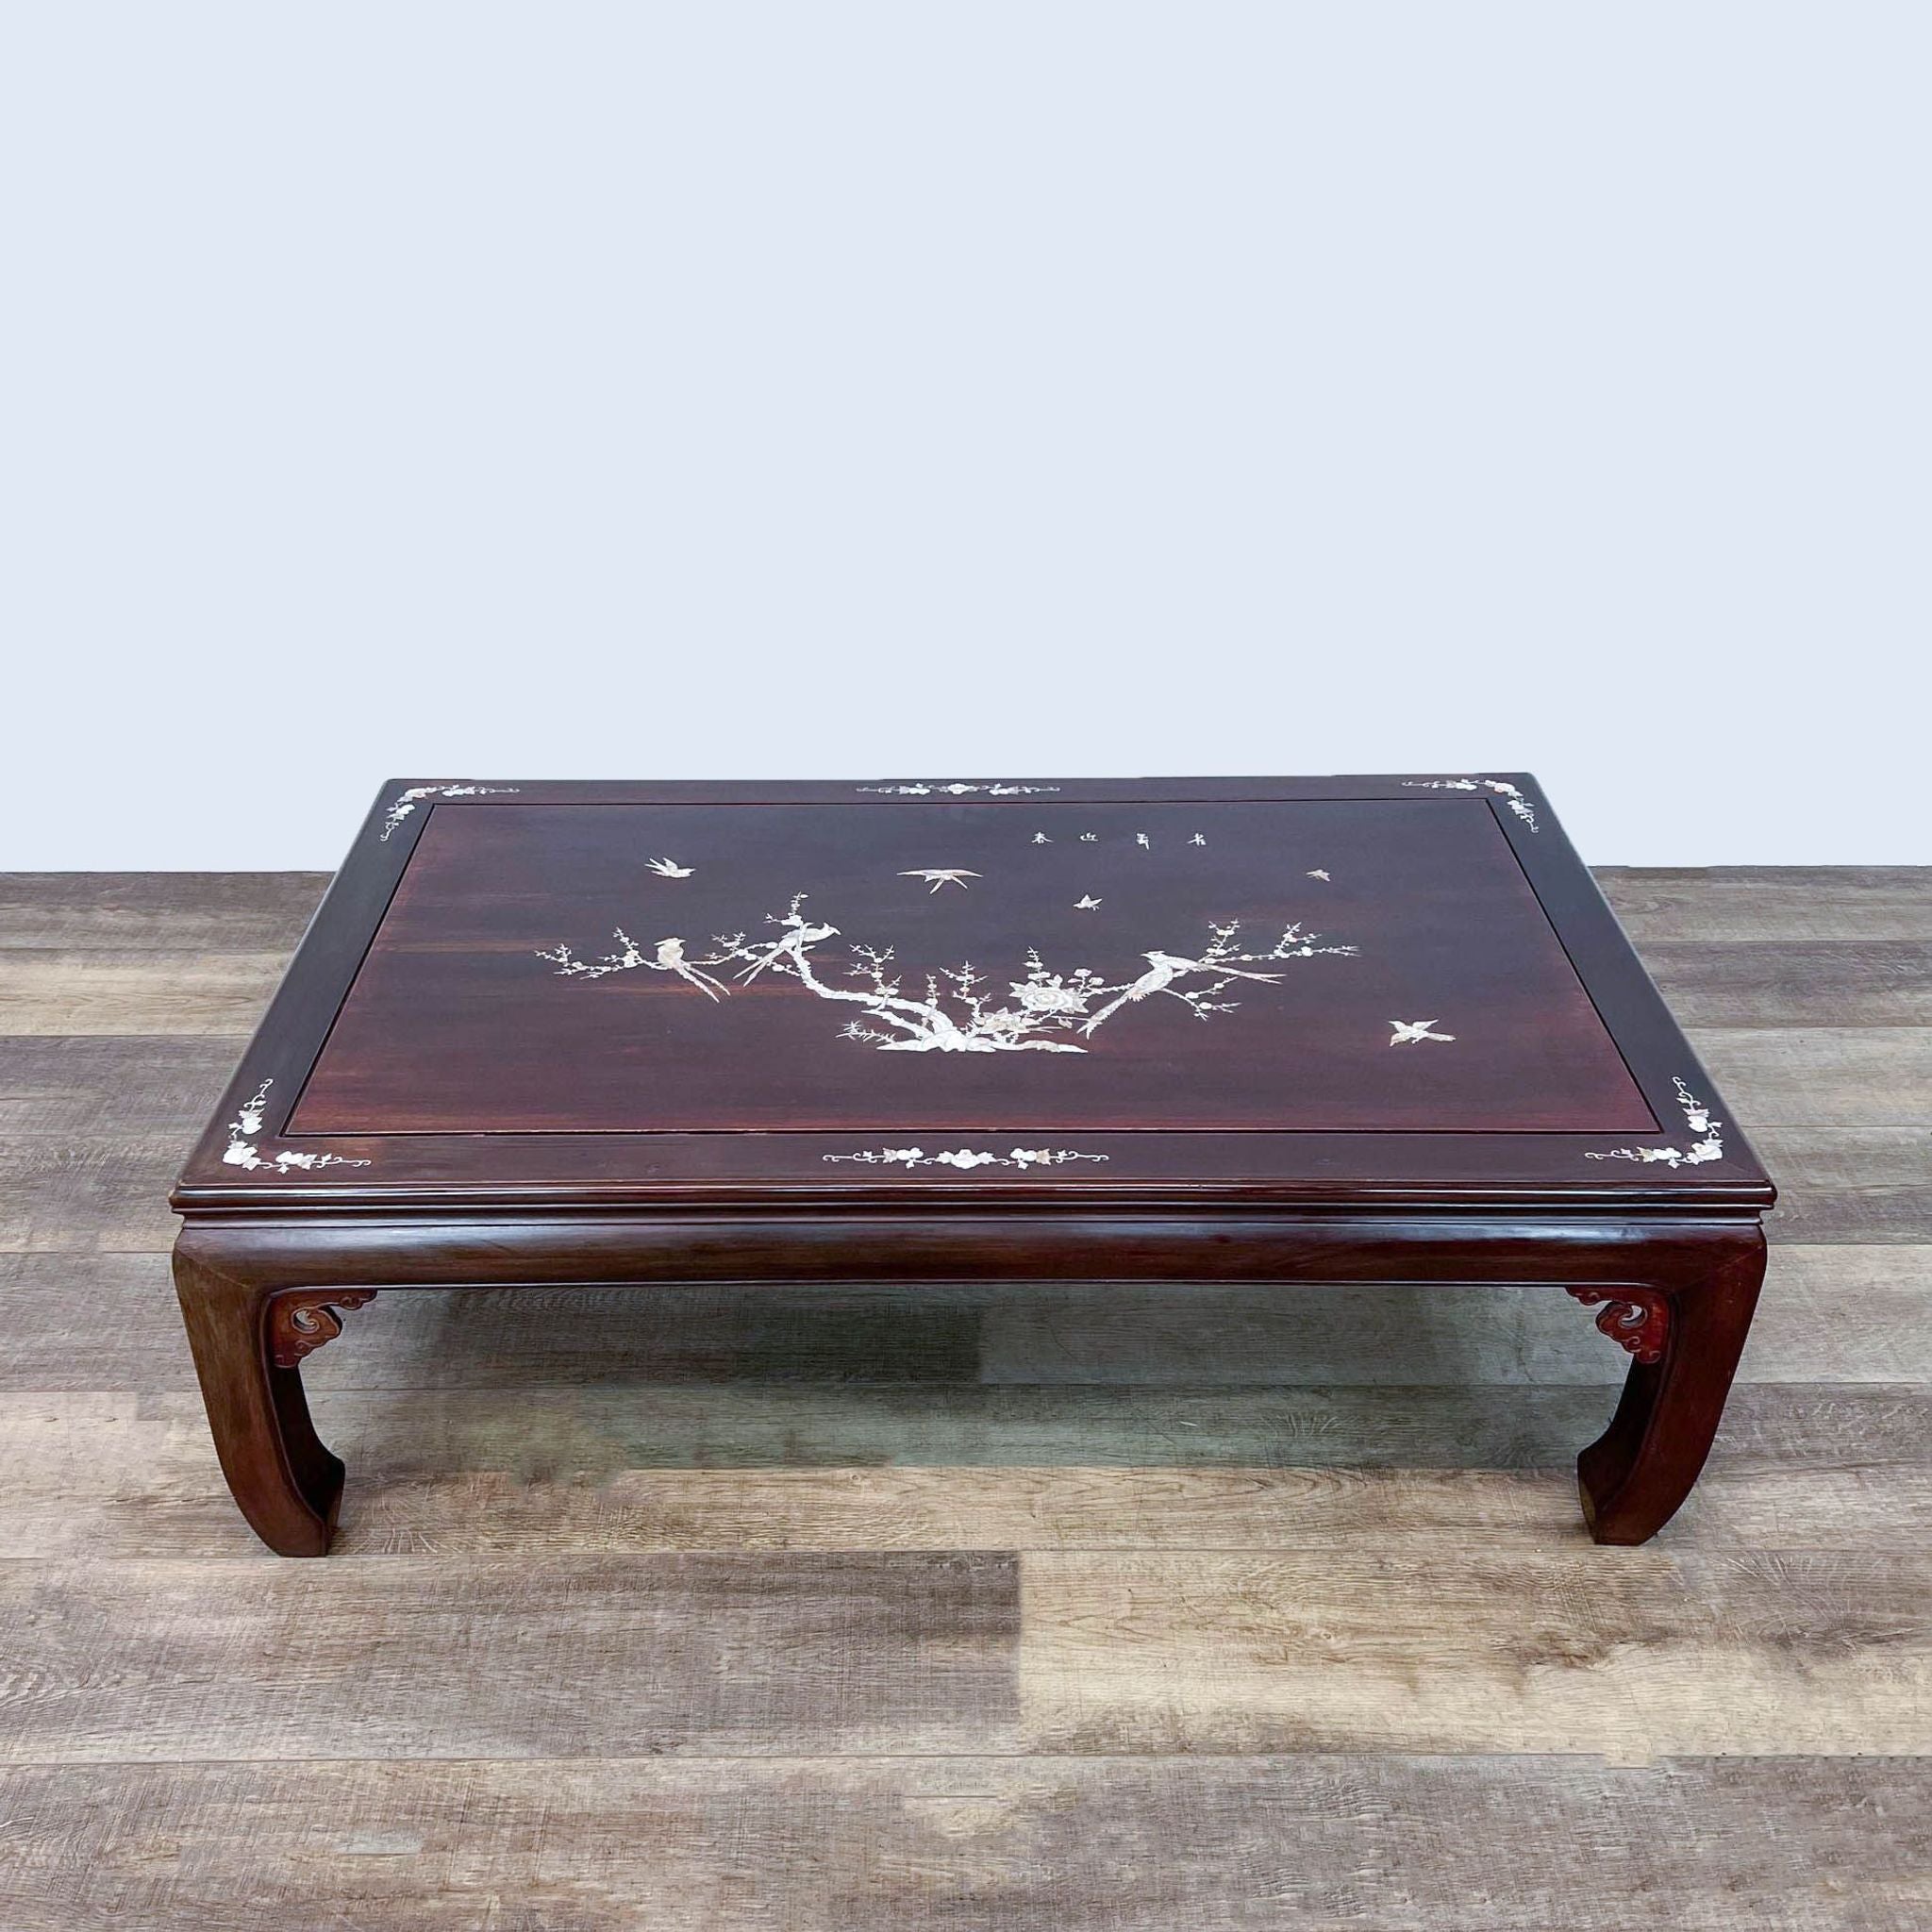 Dark wooden Reperch coffee table featuring intricate mother of pearl inlay design, positioned on a wooden floor.